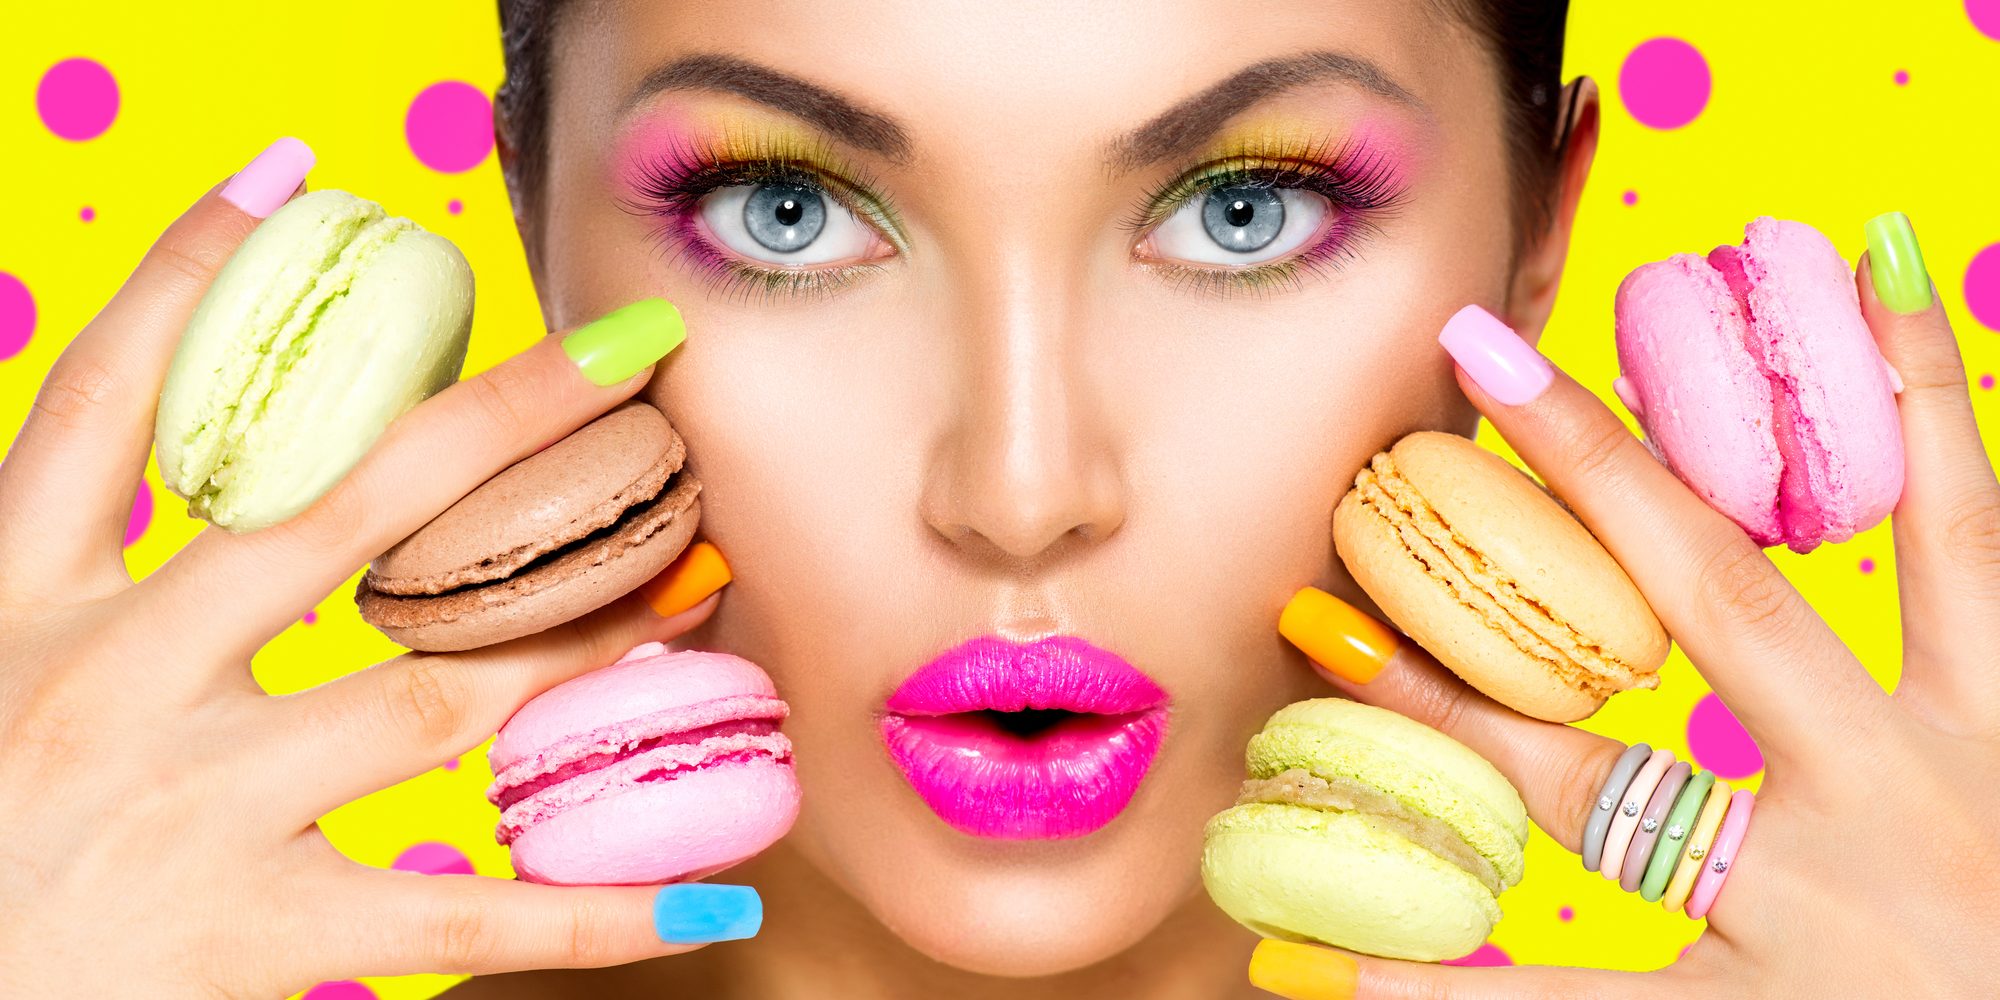 Girl with colorful makeup and manicure taking colorful macaroons